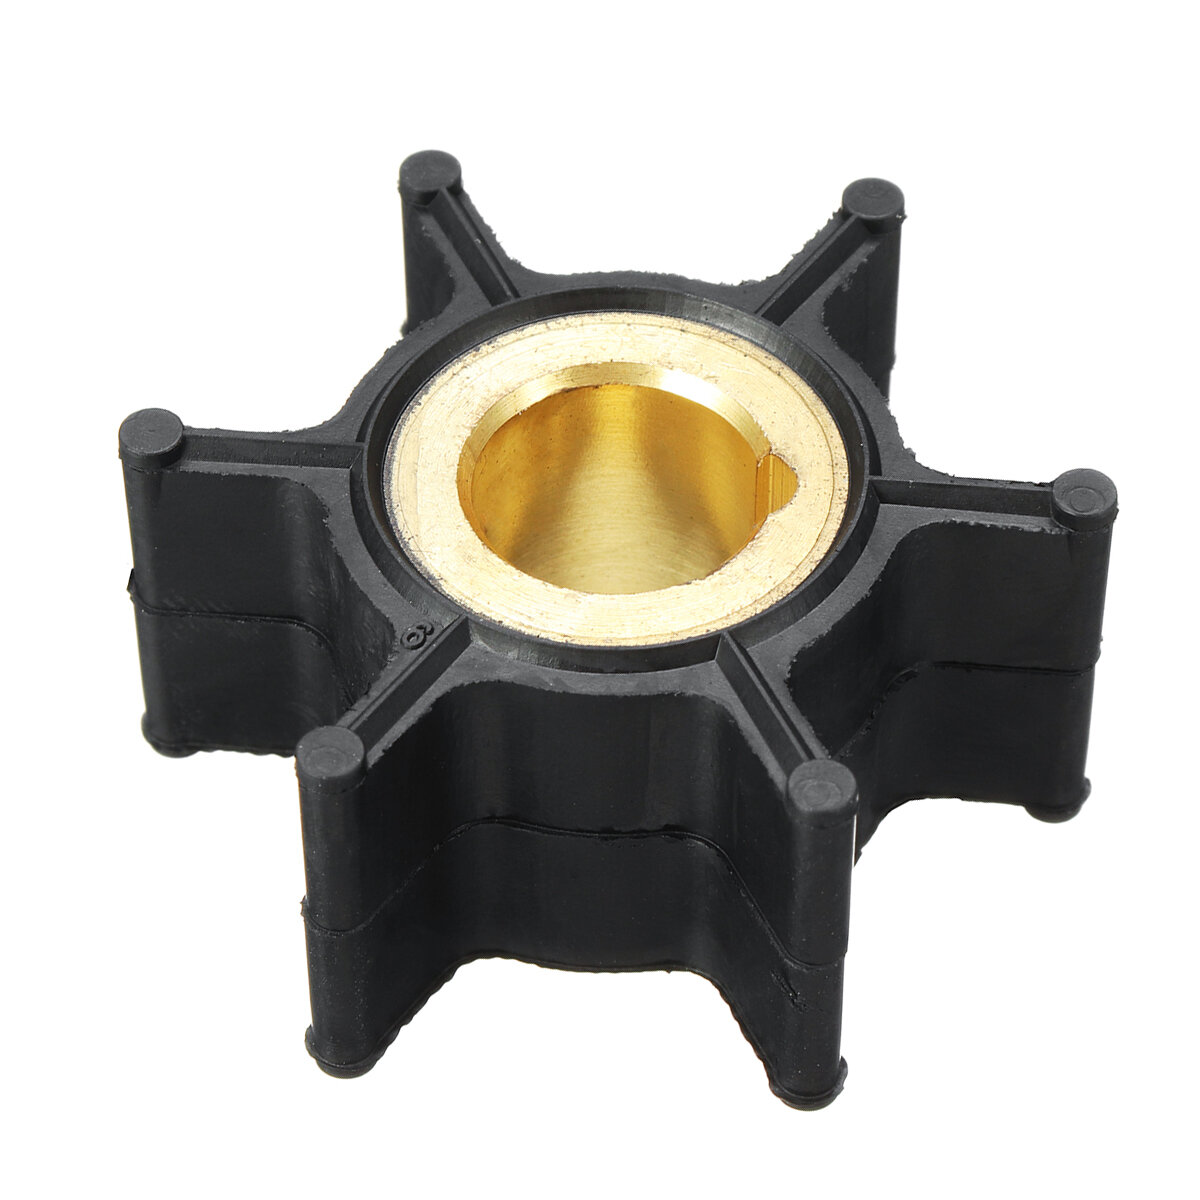 New Water Pump Impeller For Evinrude Johnson 4HP-8HP Outboard Motor 389576 / 436137